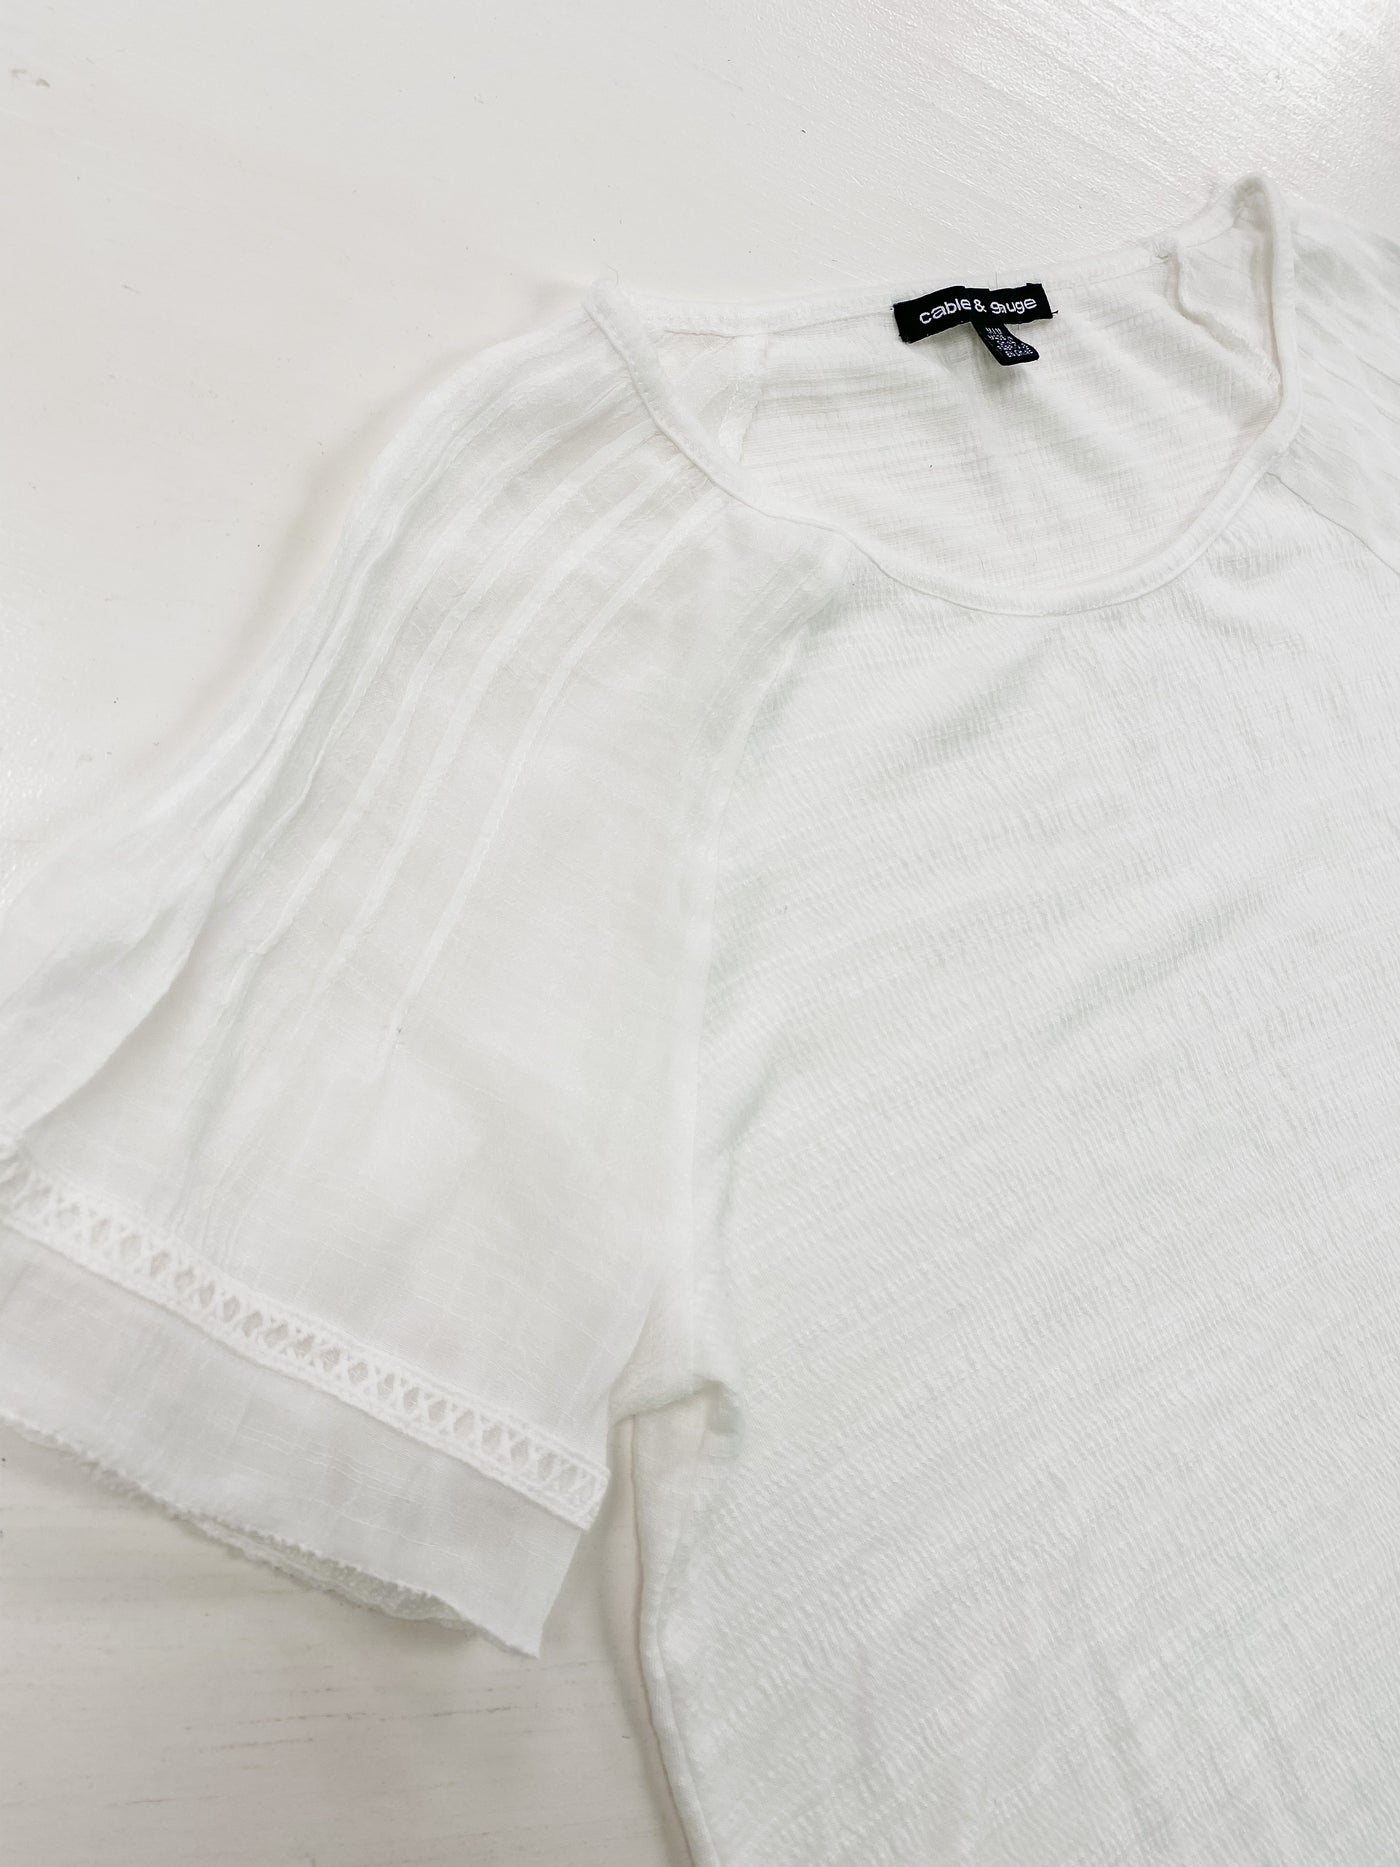 Cable & Gauge Little White Tee